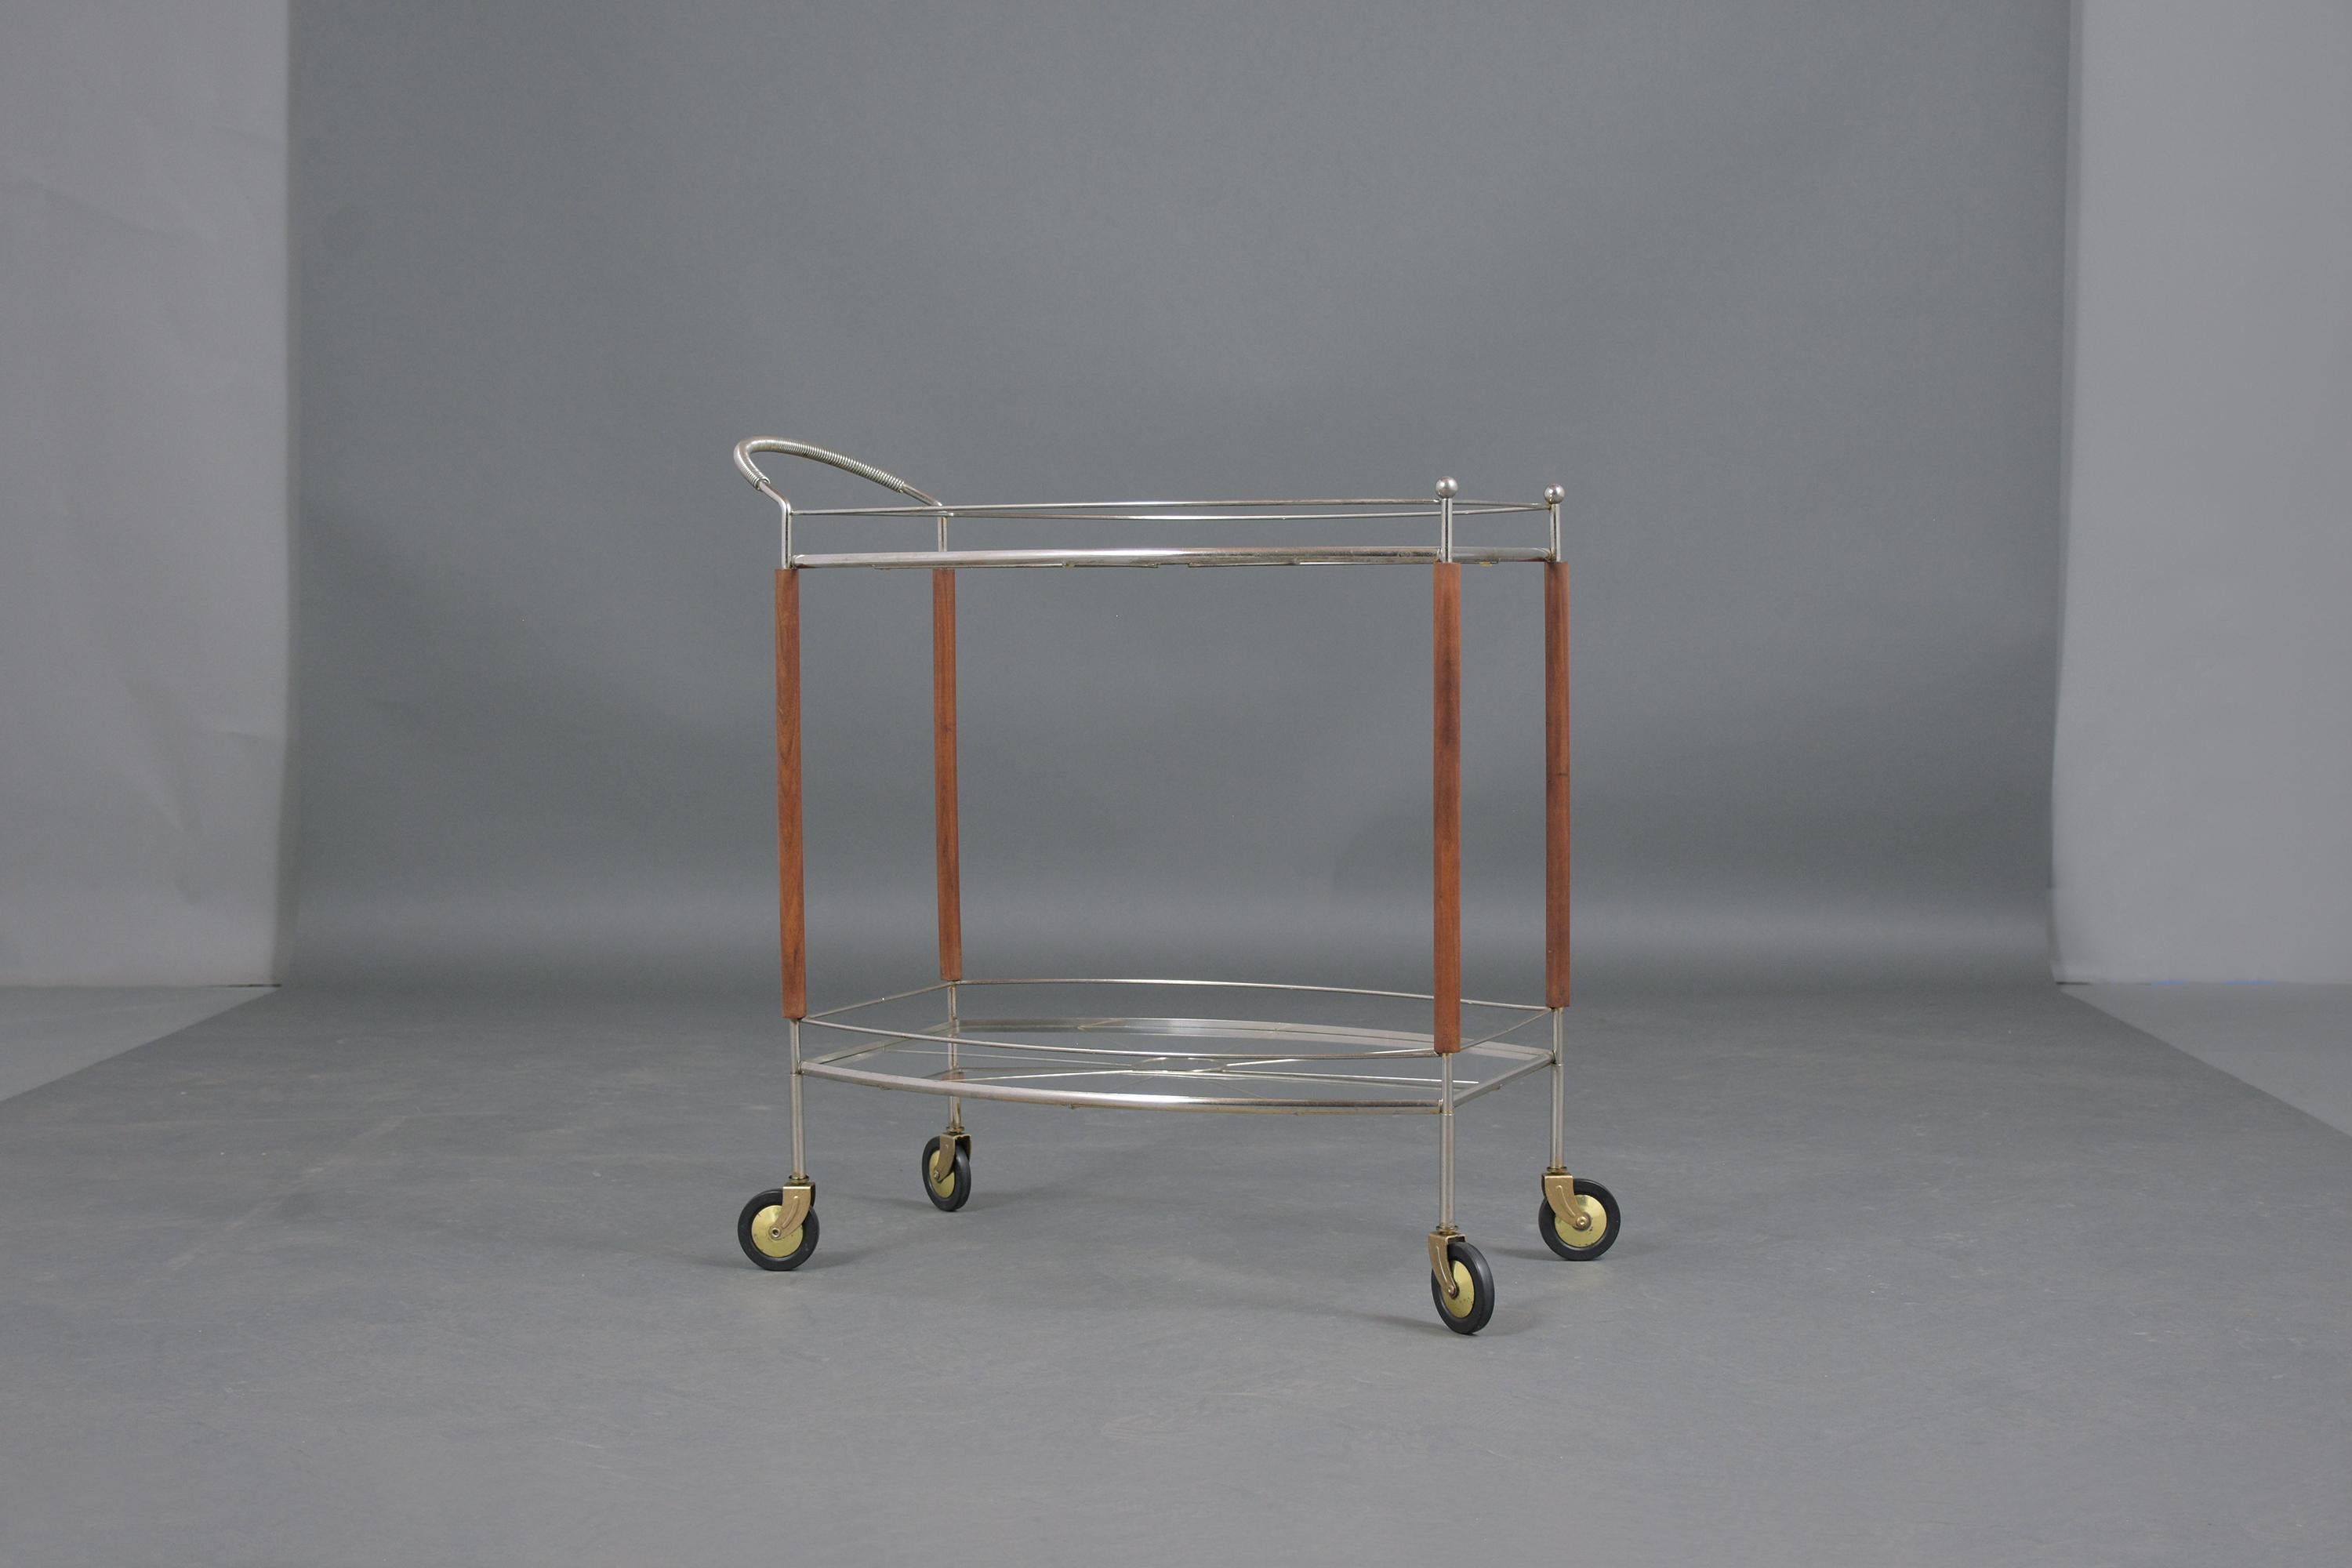 An extraordinary mid-century rolling bar cart that's beautifully crafted out of steel in great condition and ready to be used. The sturdy metal frame is chrome plated, comes with two glass shelves, and rests on its four original caster wheels with